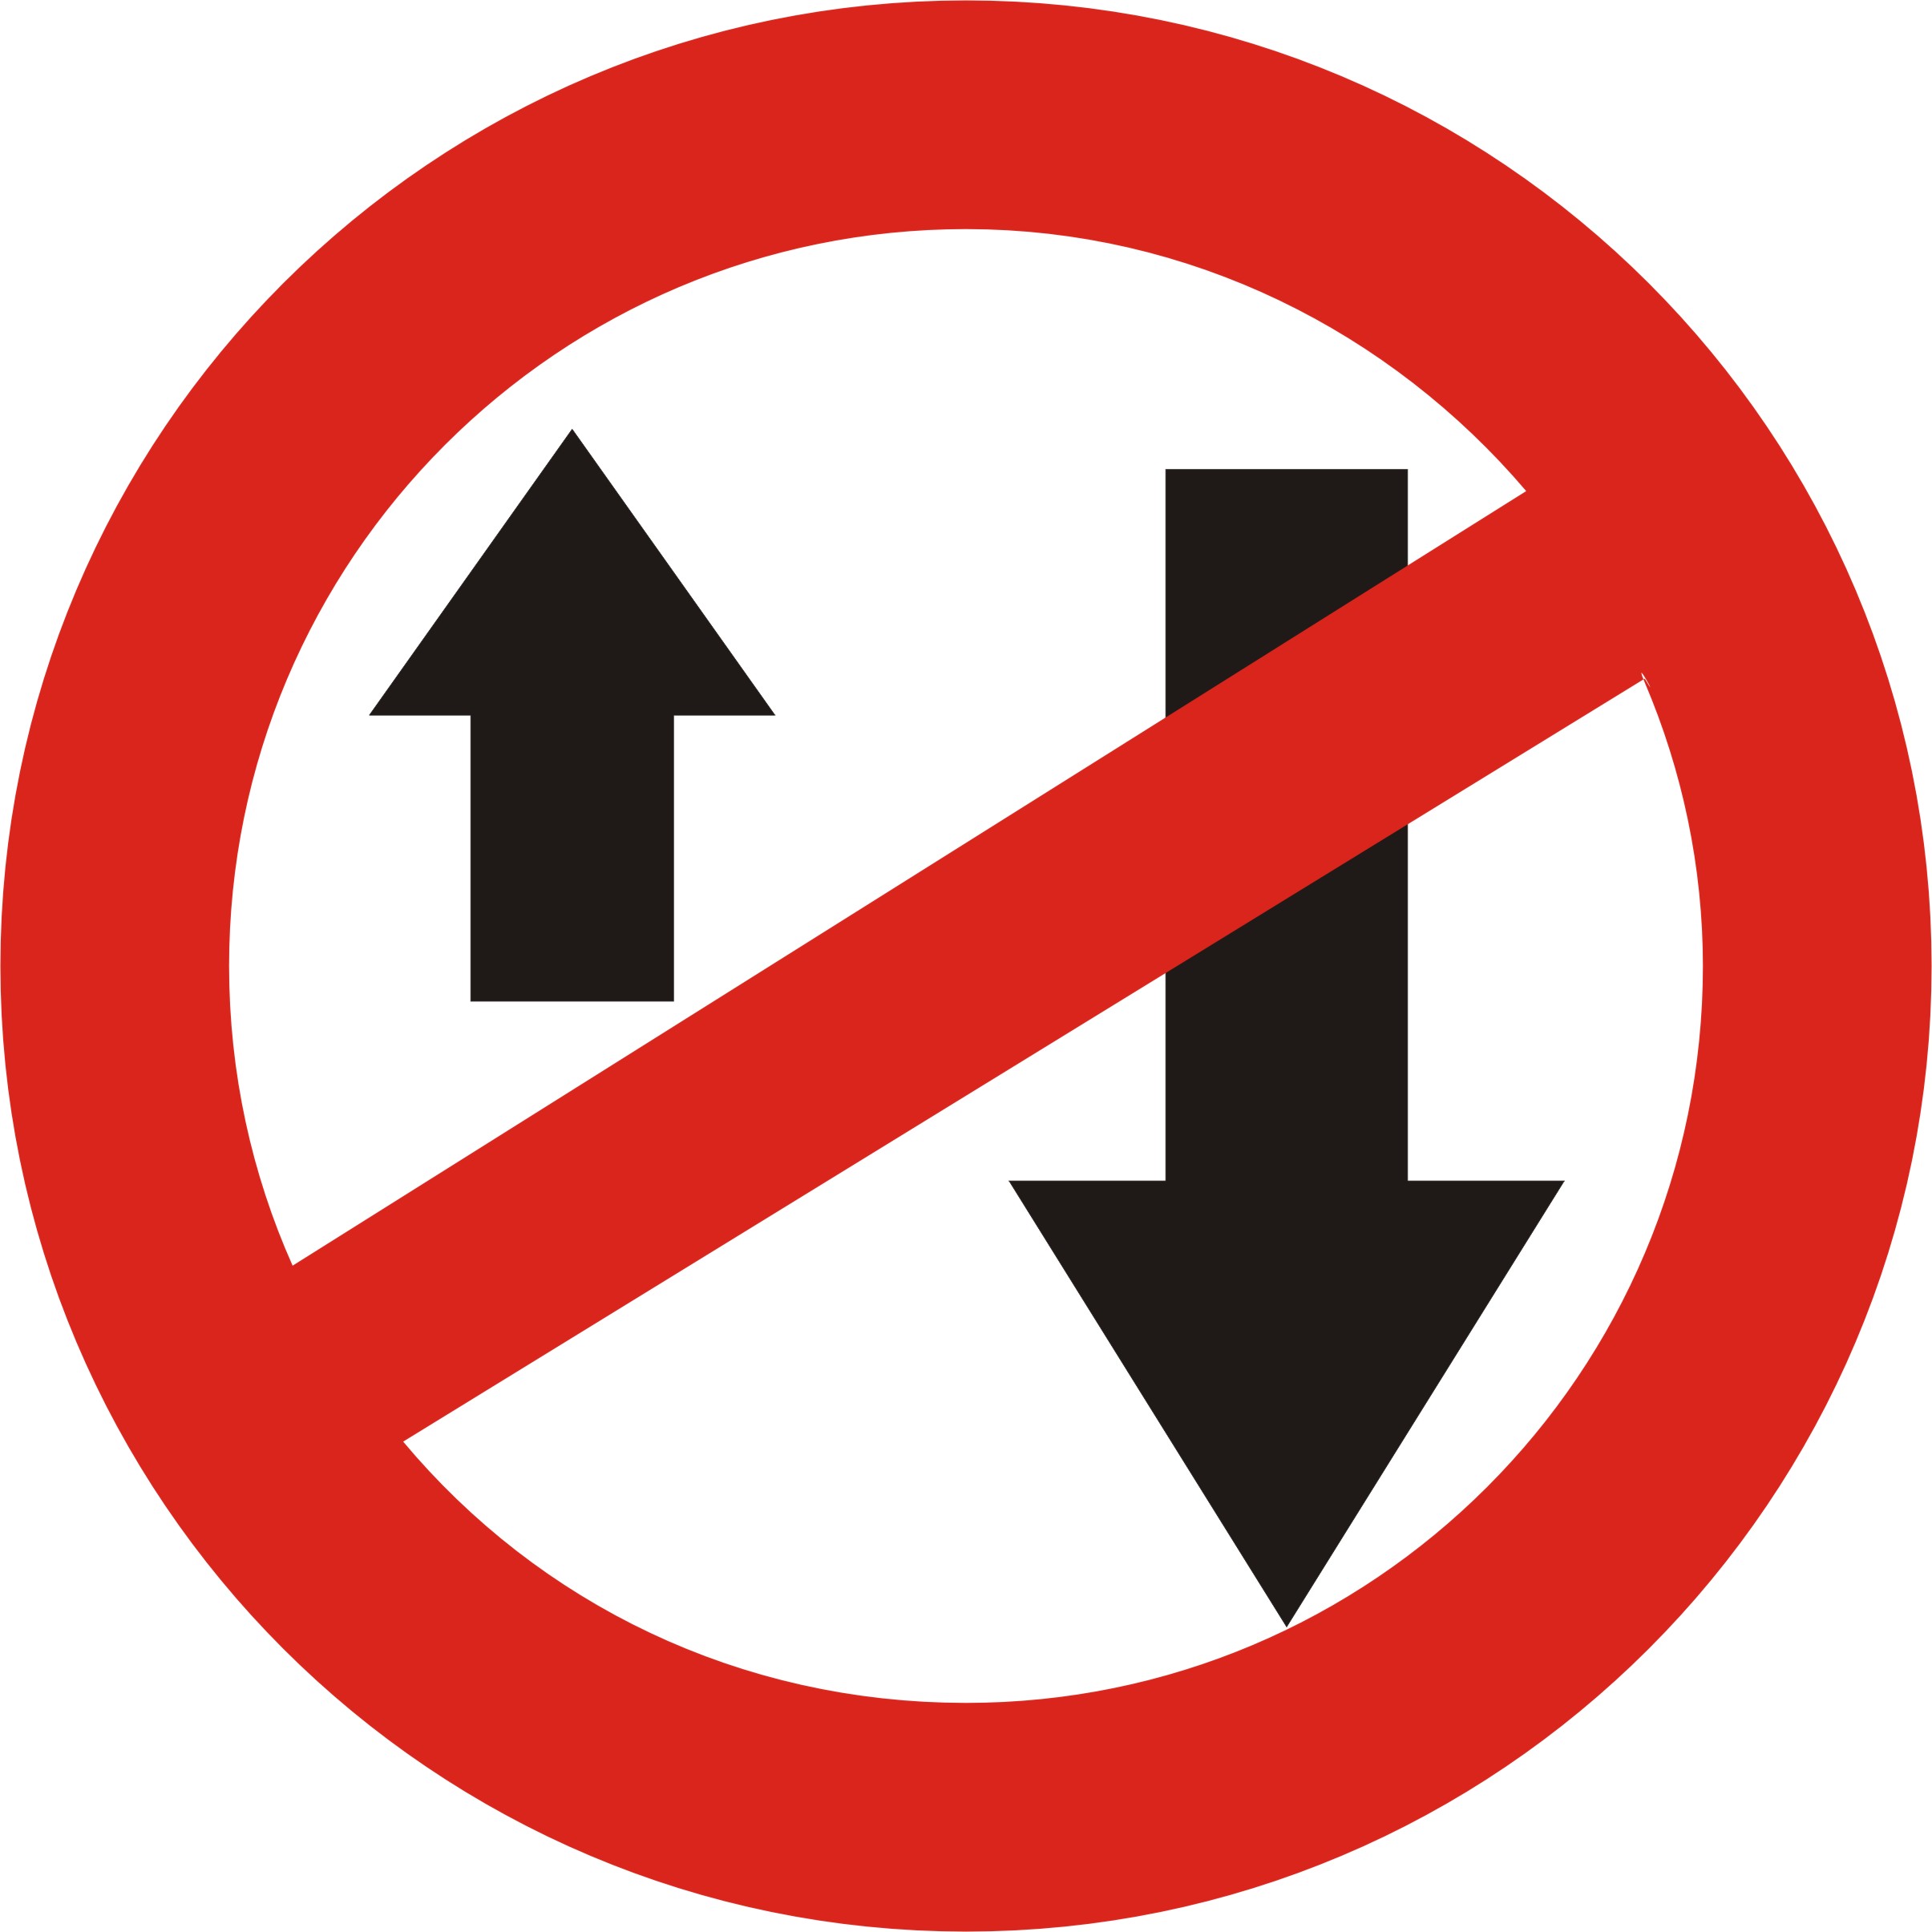 Road Sign No Entry Right.jpg - ClipArt Best - ClipArt Best